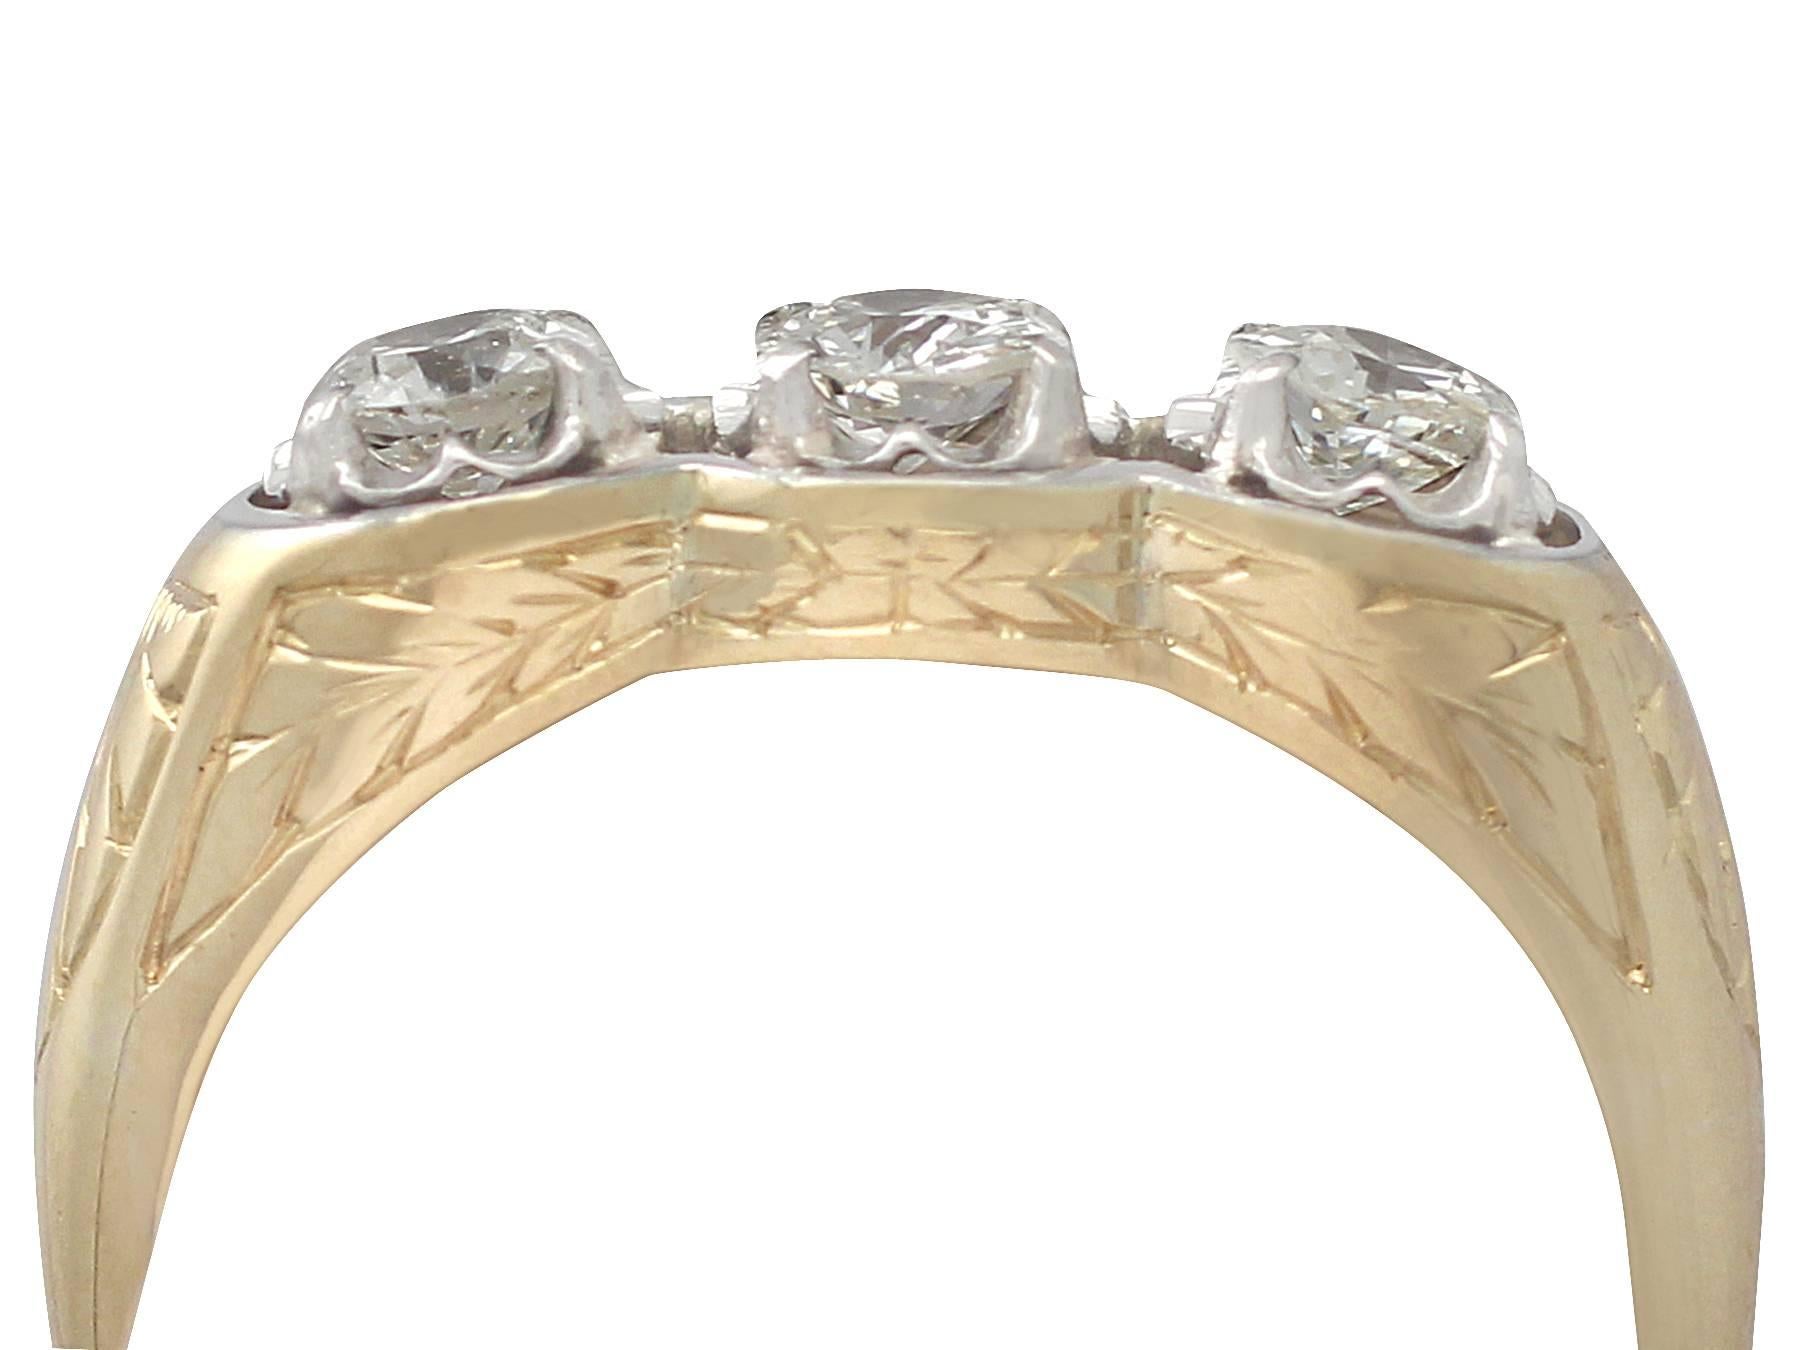 A fine and impressive vintage 0.60 carat diamond and 15 karat yellow gold, platinum set three stone/trilogy ring; part of our diverse diamond jewelry and estate jewelry collections

This fine and impressive diamond trilogy ring has been crafted in